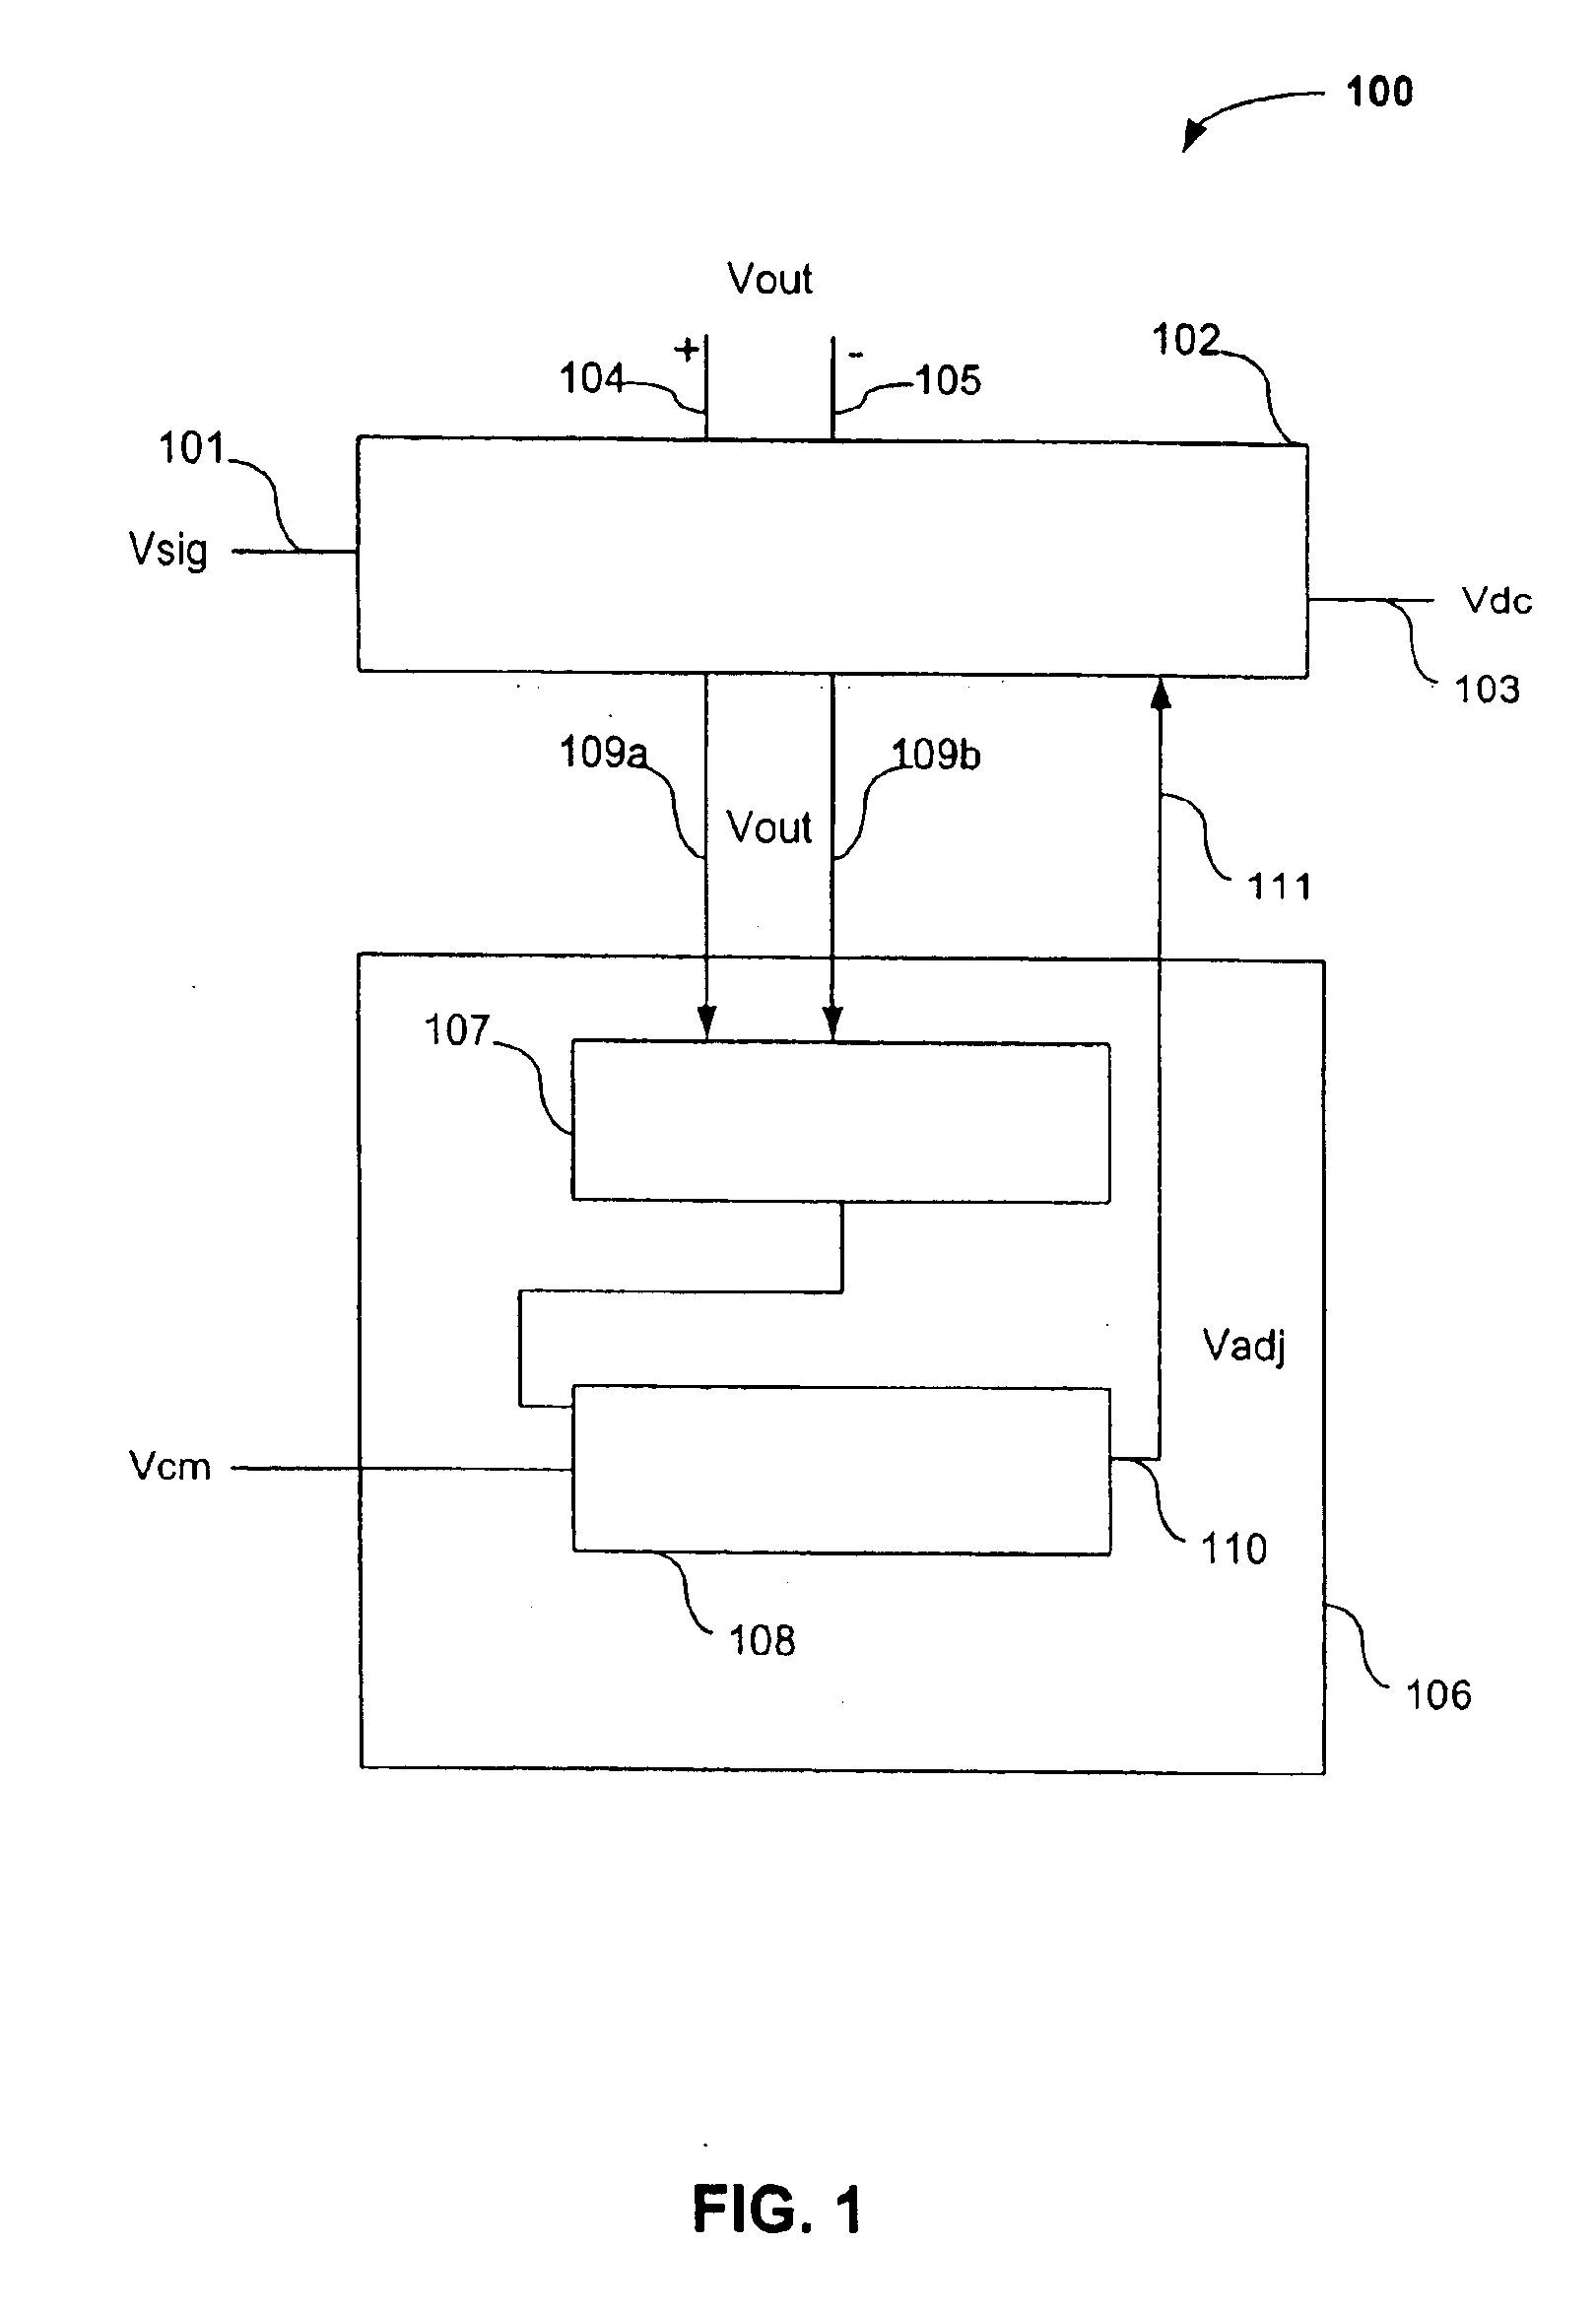 Single-ended-to-differential converter with common-mode voltage control